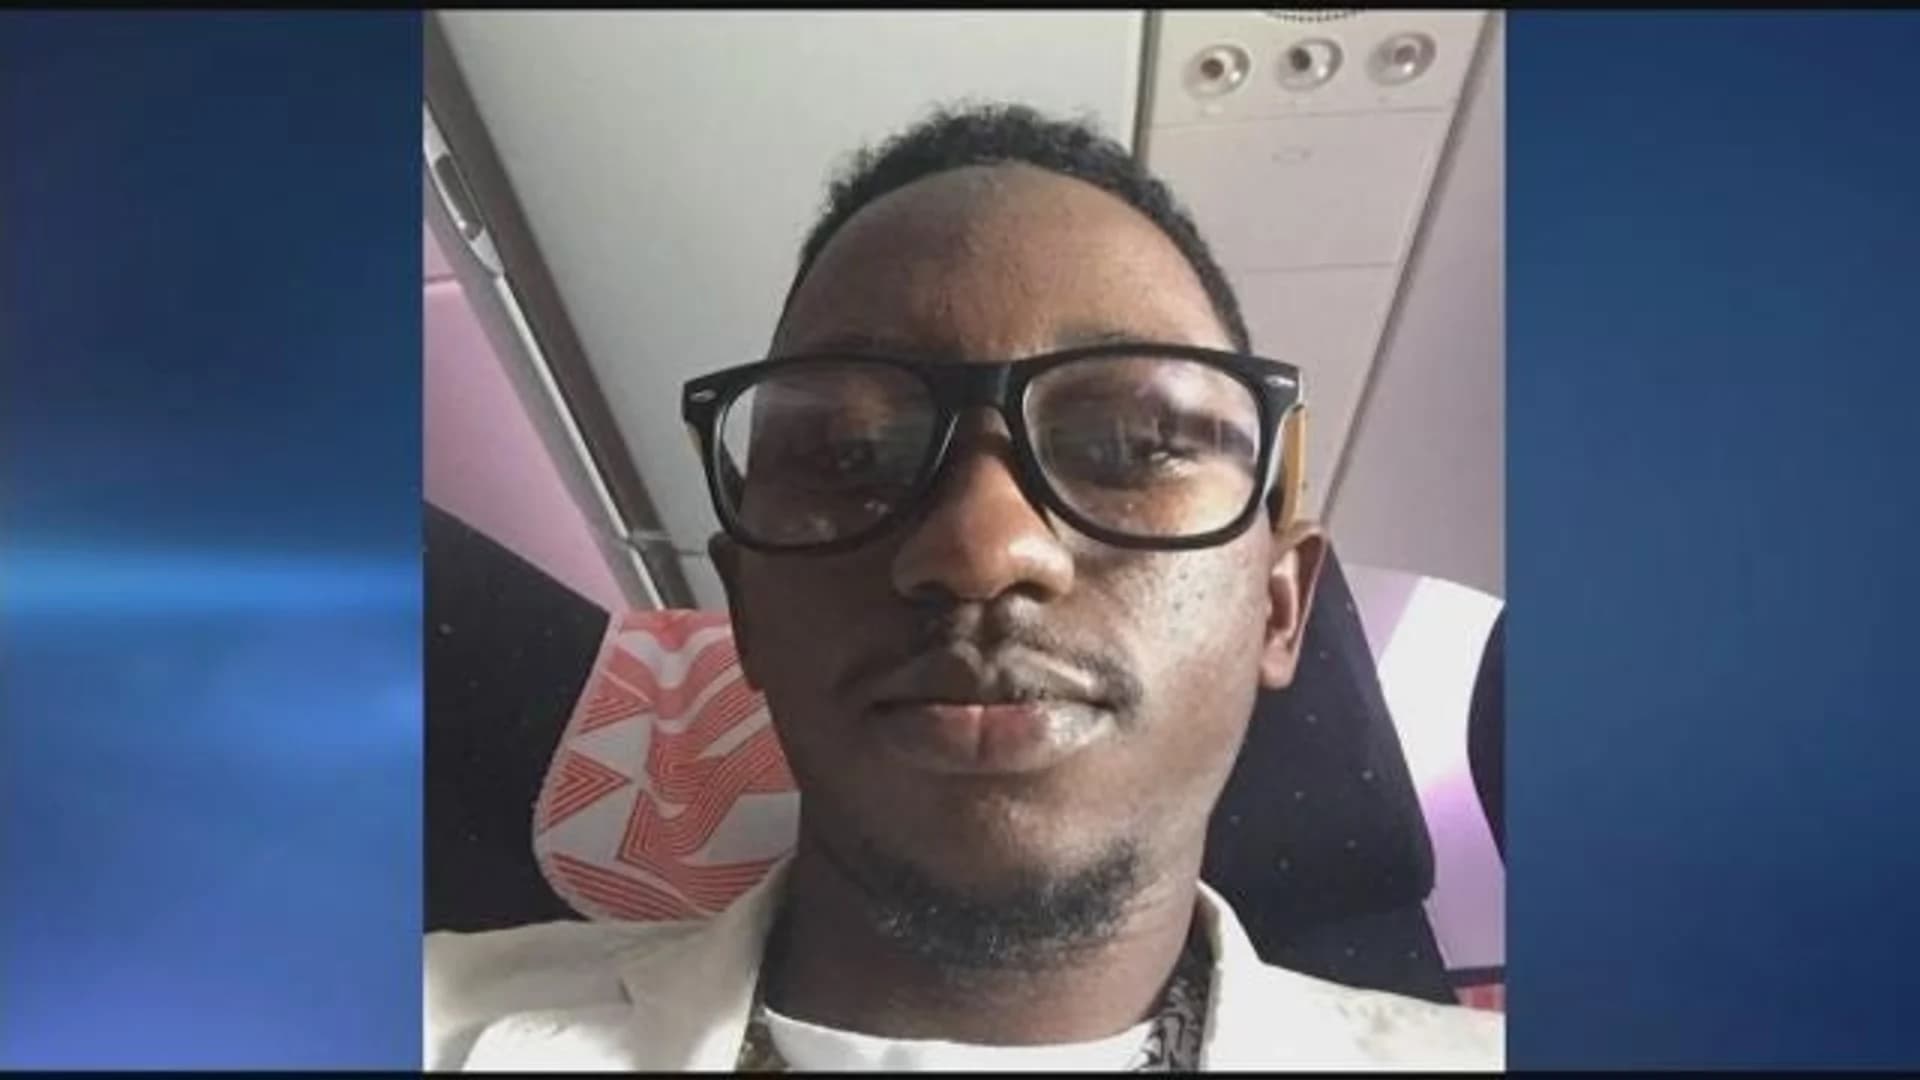 Family of man fatally shot collects funds to help fly his body back to Africa